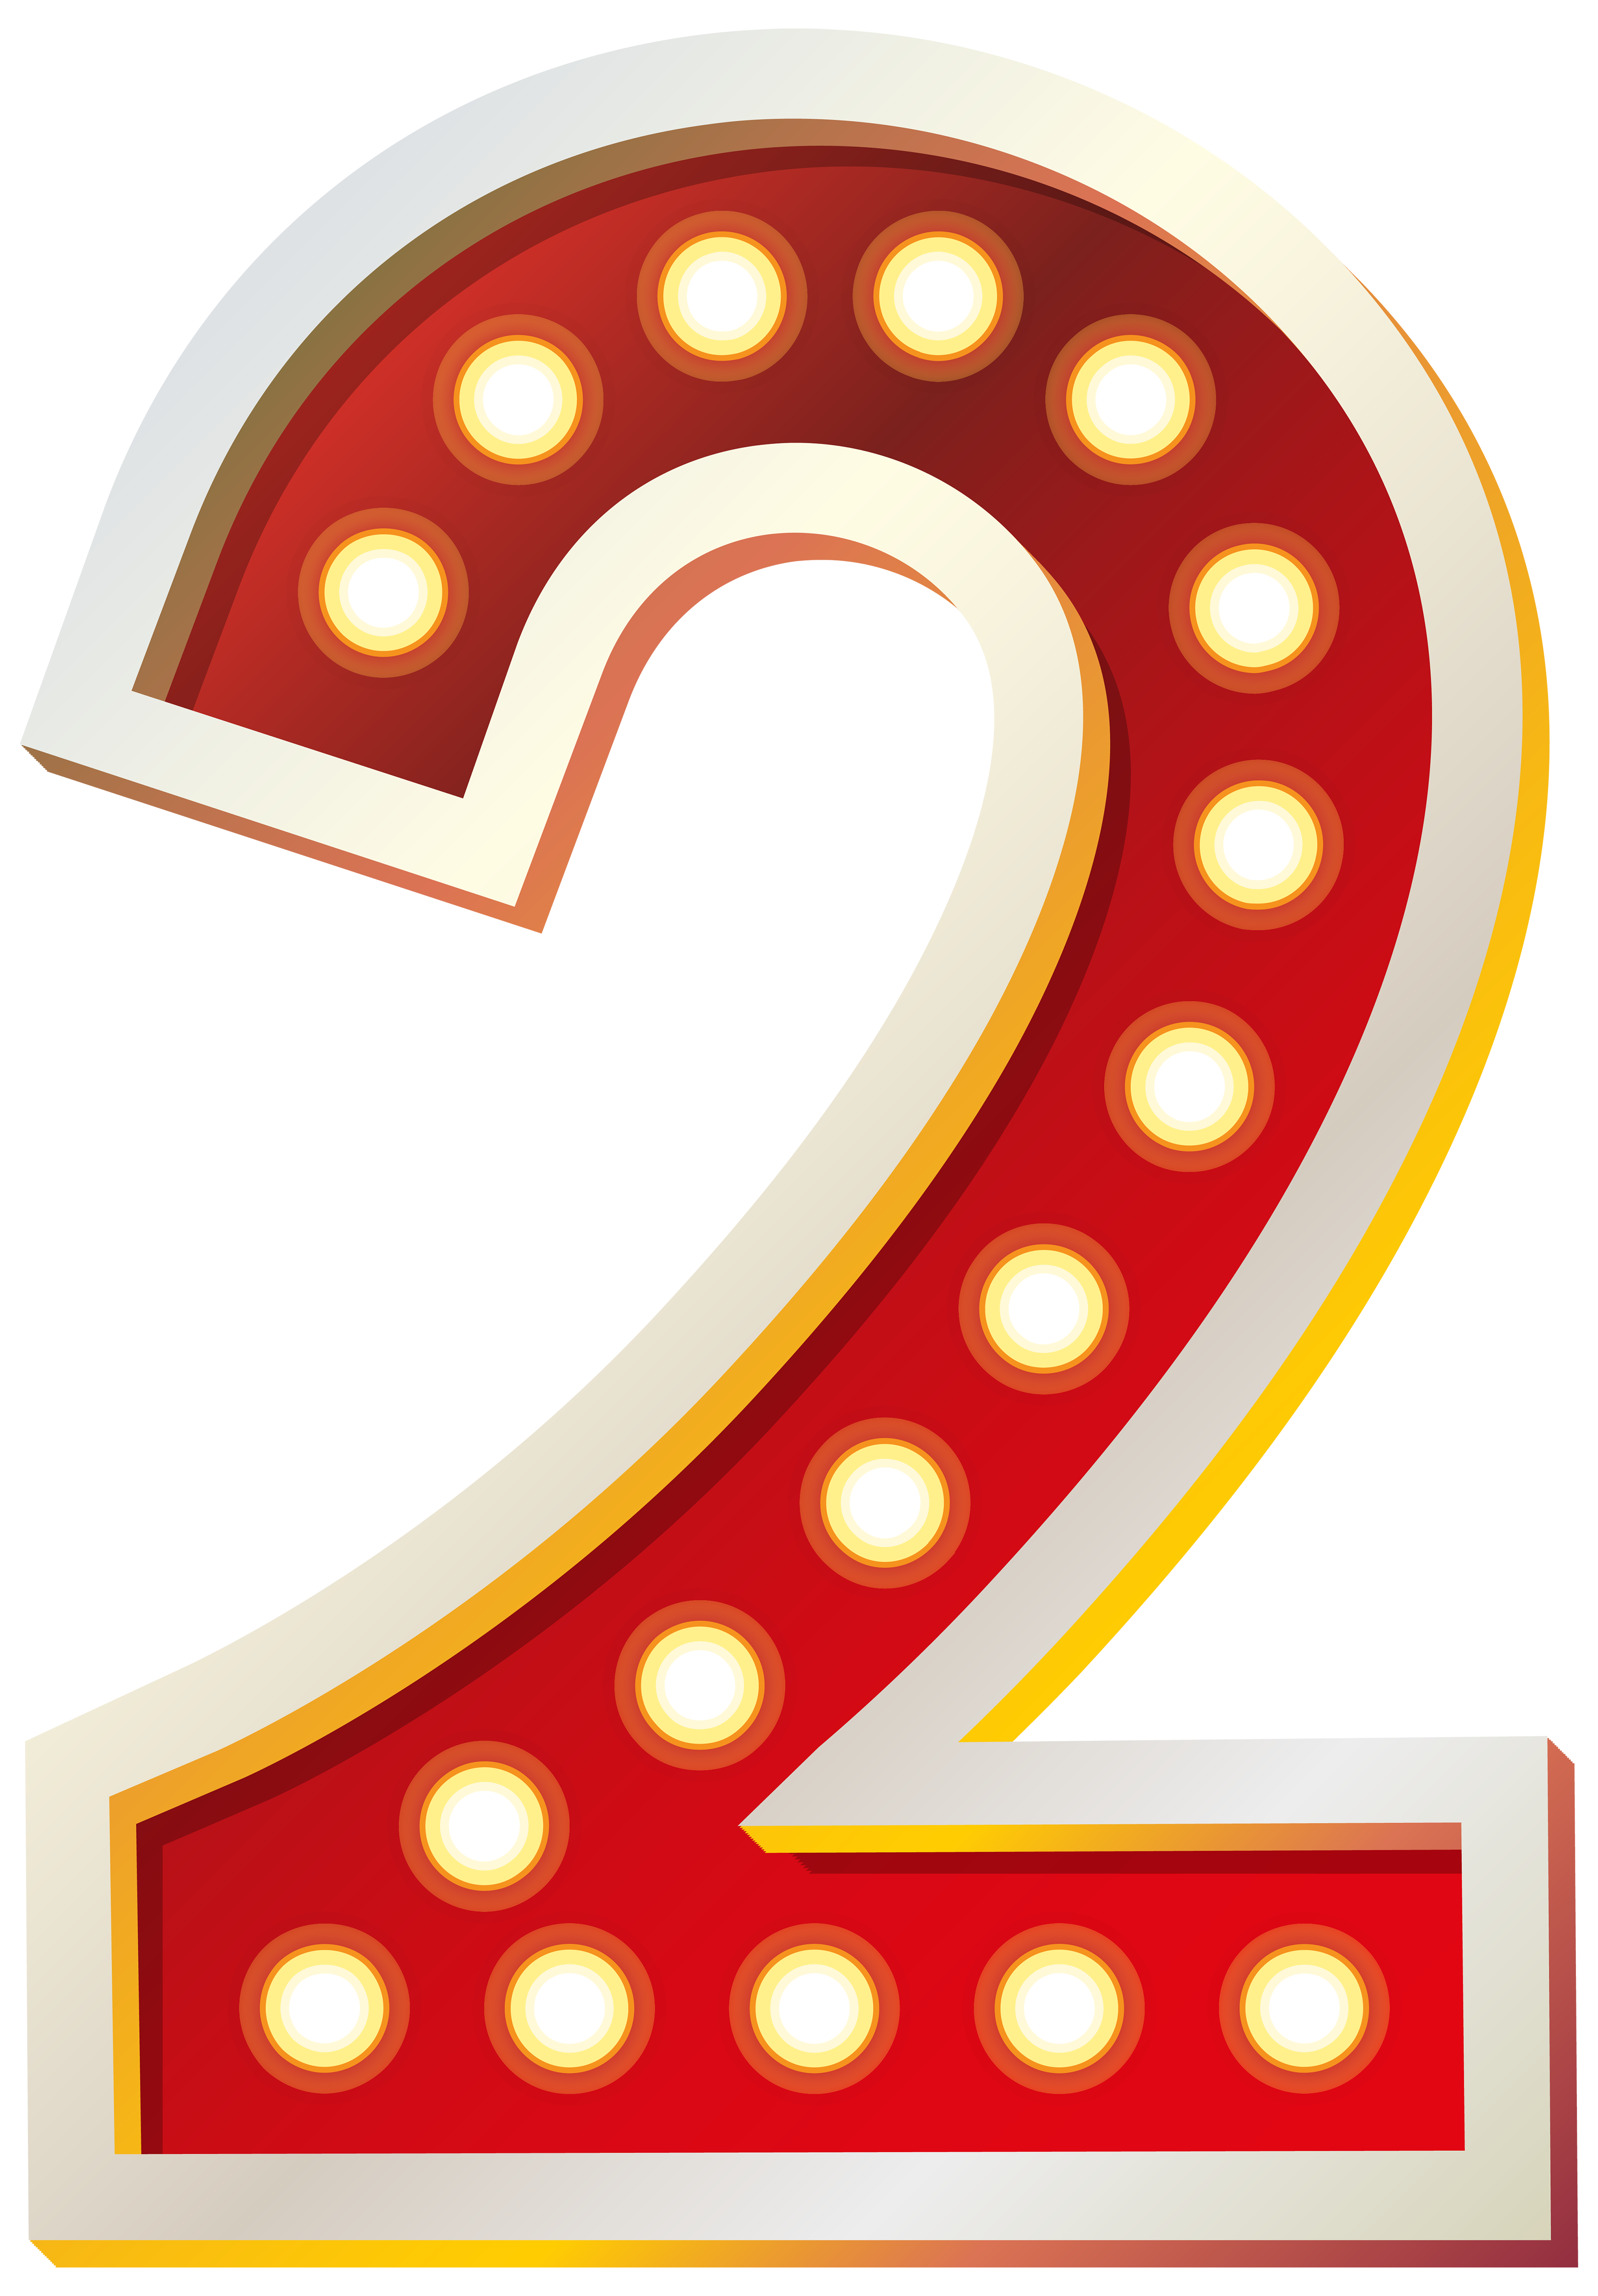 red-number-two-with-lights-png-clip-art-image-gallery-yopriceville